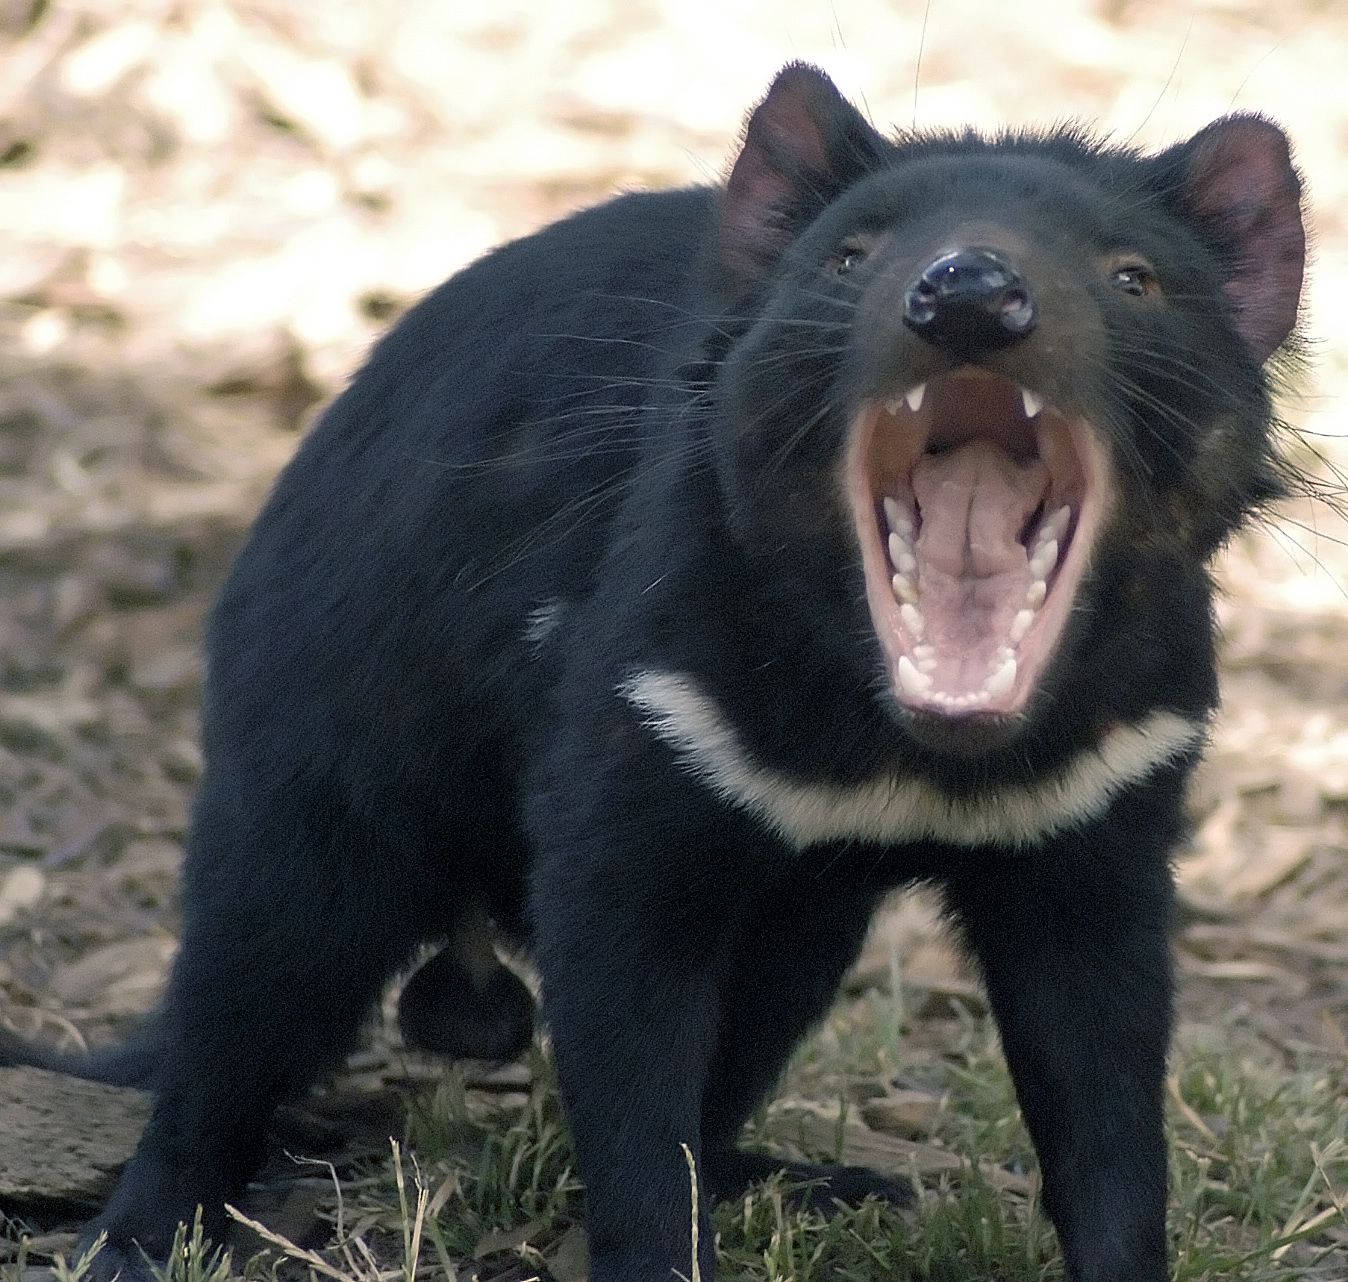 A Black Animal With Its Mouth Open